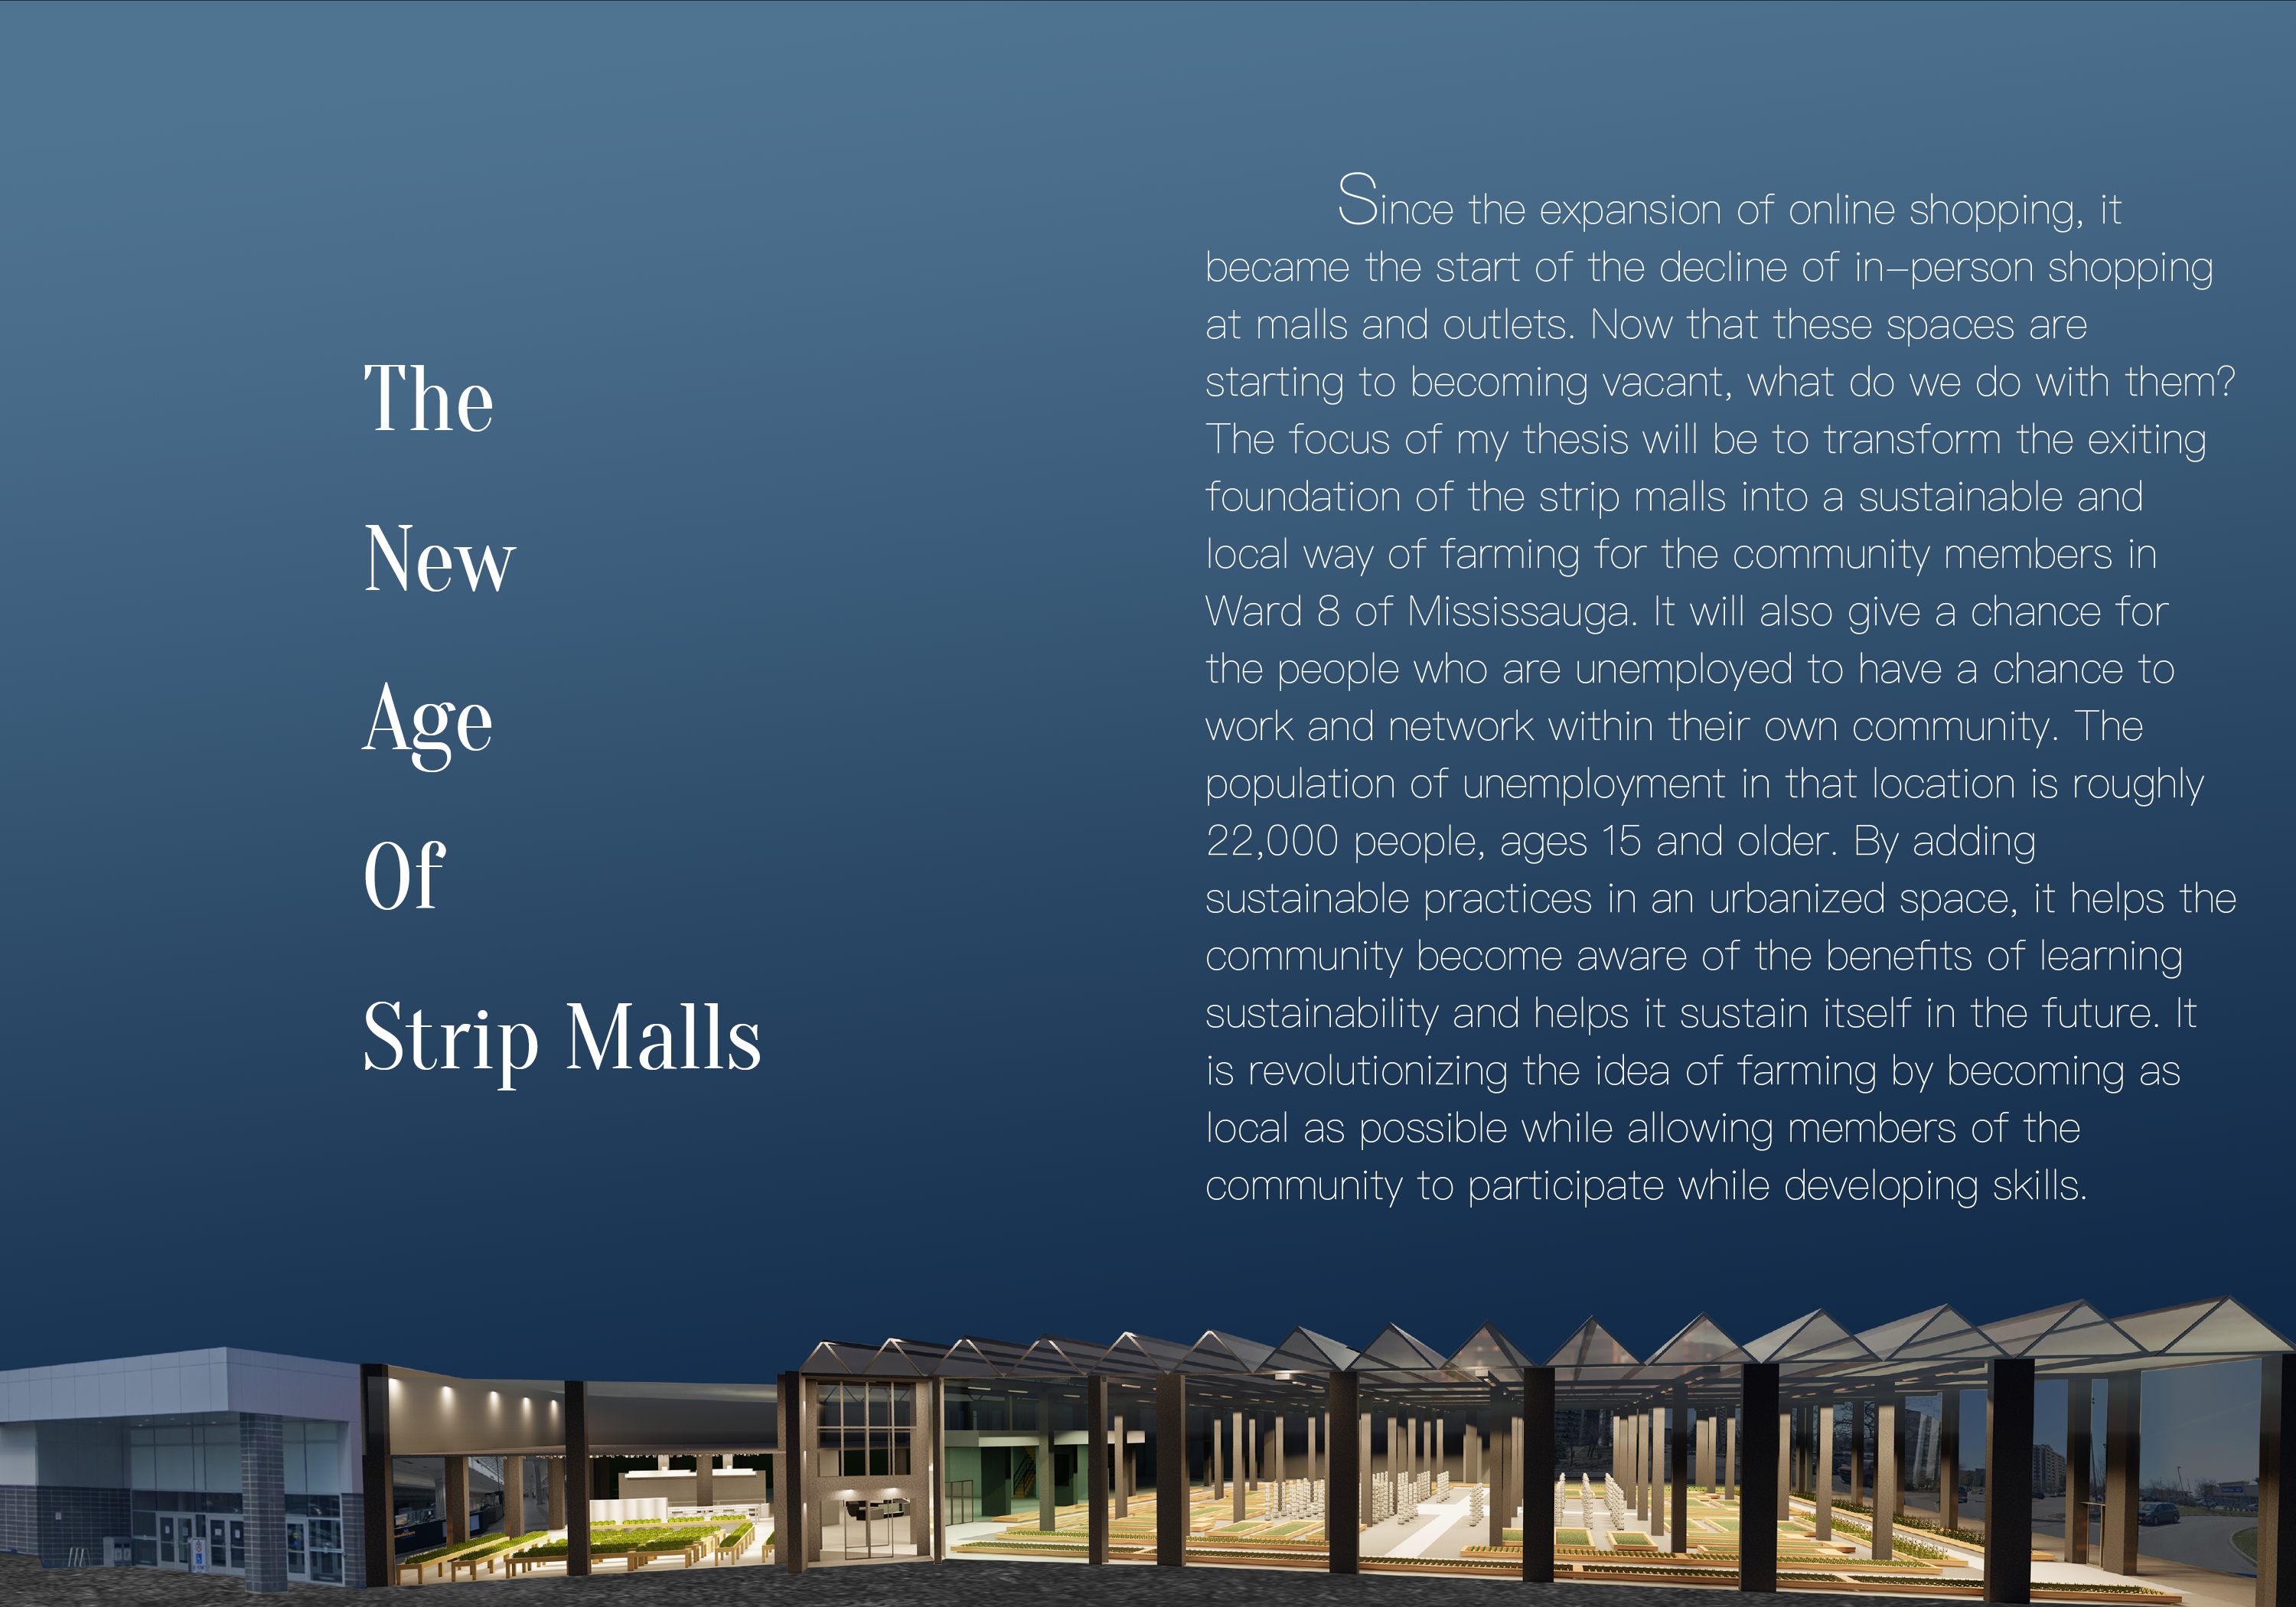 The New Age of Strip Malls